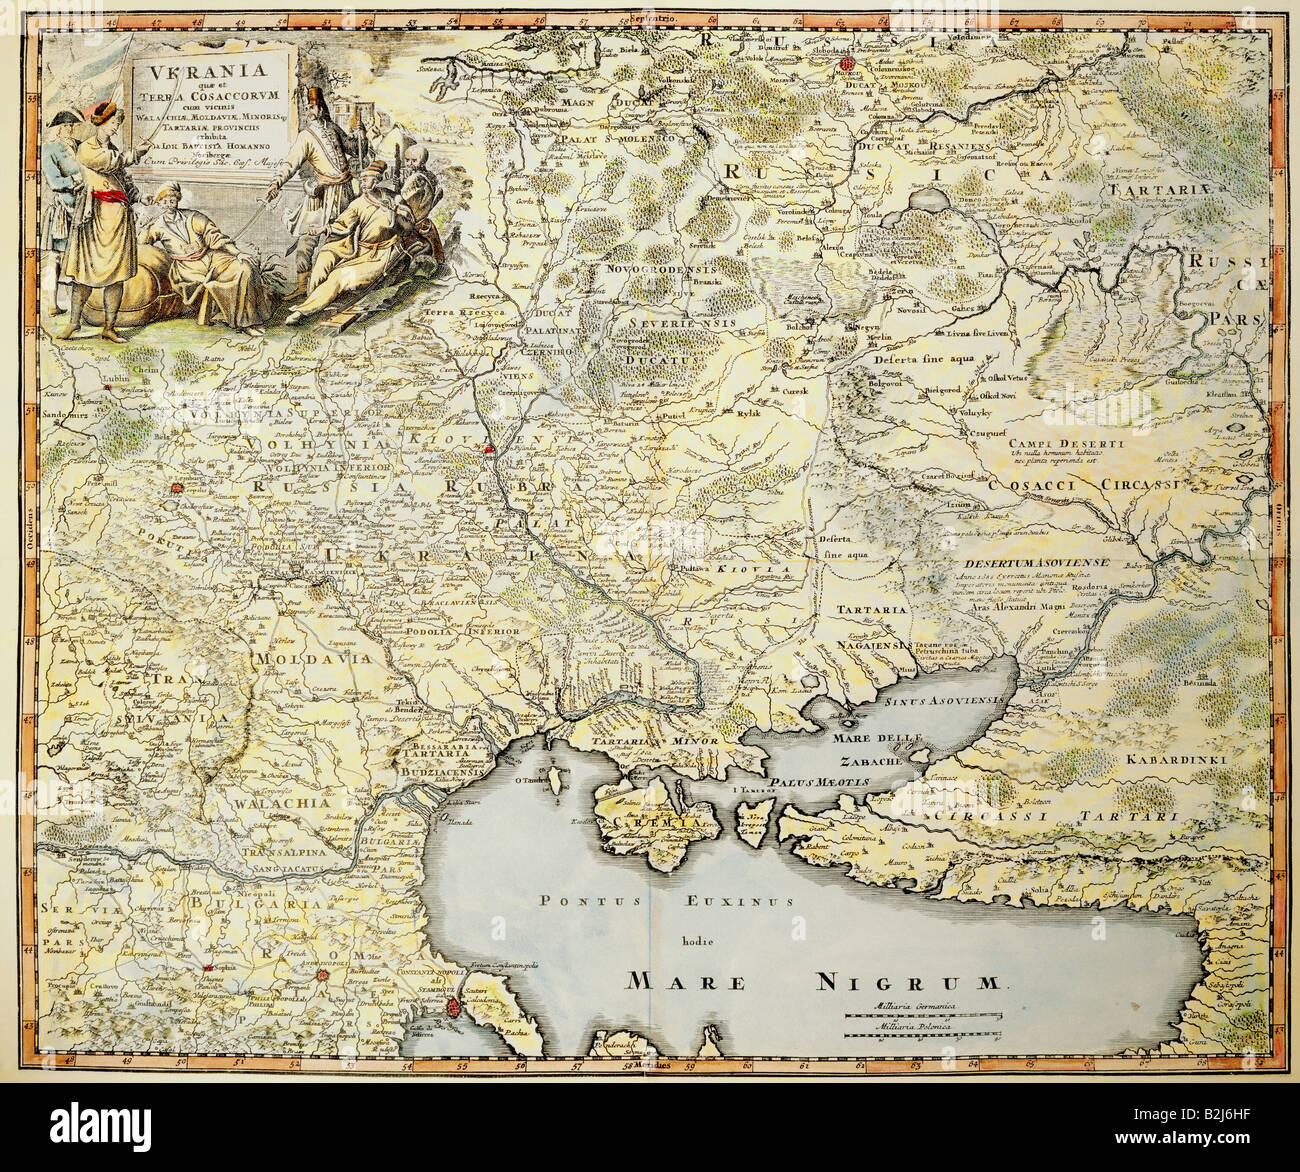 cartography, maps, Ukraine, coloured copper engraving by Johann Baptist Homann, Nuremberg, 1st half 18th century, geography, private collection, map, Europe, Moldavia, Wallachia, Crimea, Russia, Romania, Danube, Volga, Dnieper, historic, historical, Artist's Copyright has not to be cleared Stock Photo